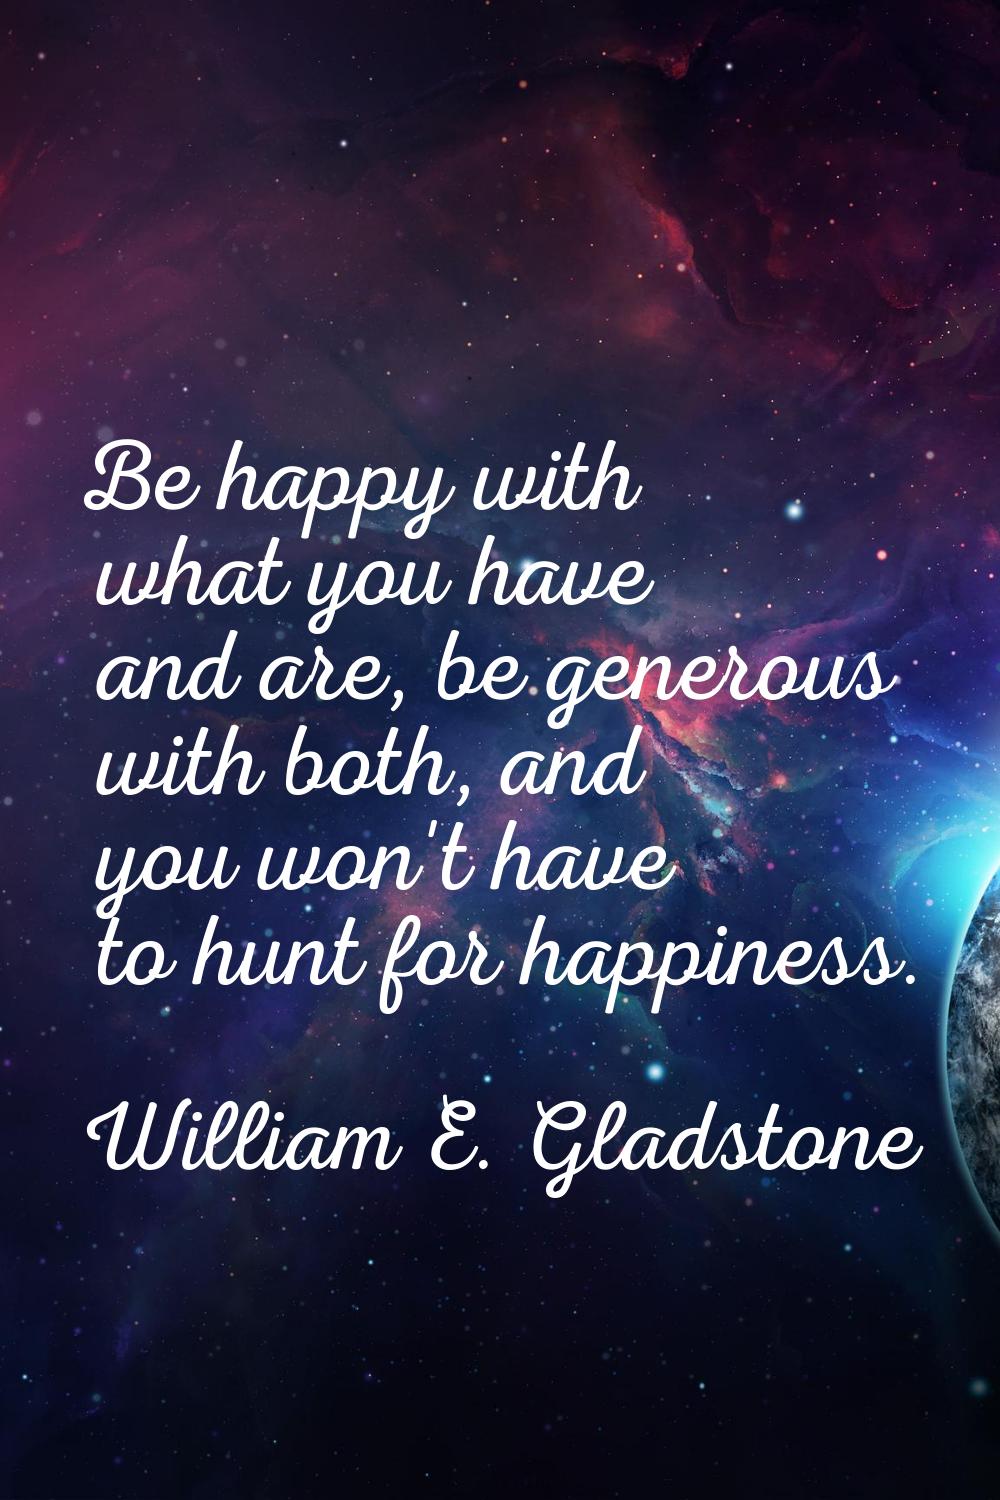 Be happy with what you have and are, be generous with both, and you won't have to hunt for happines